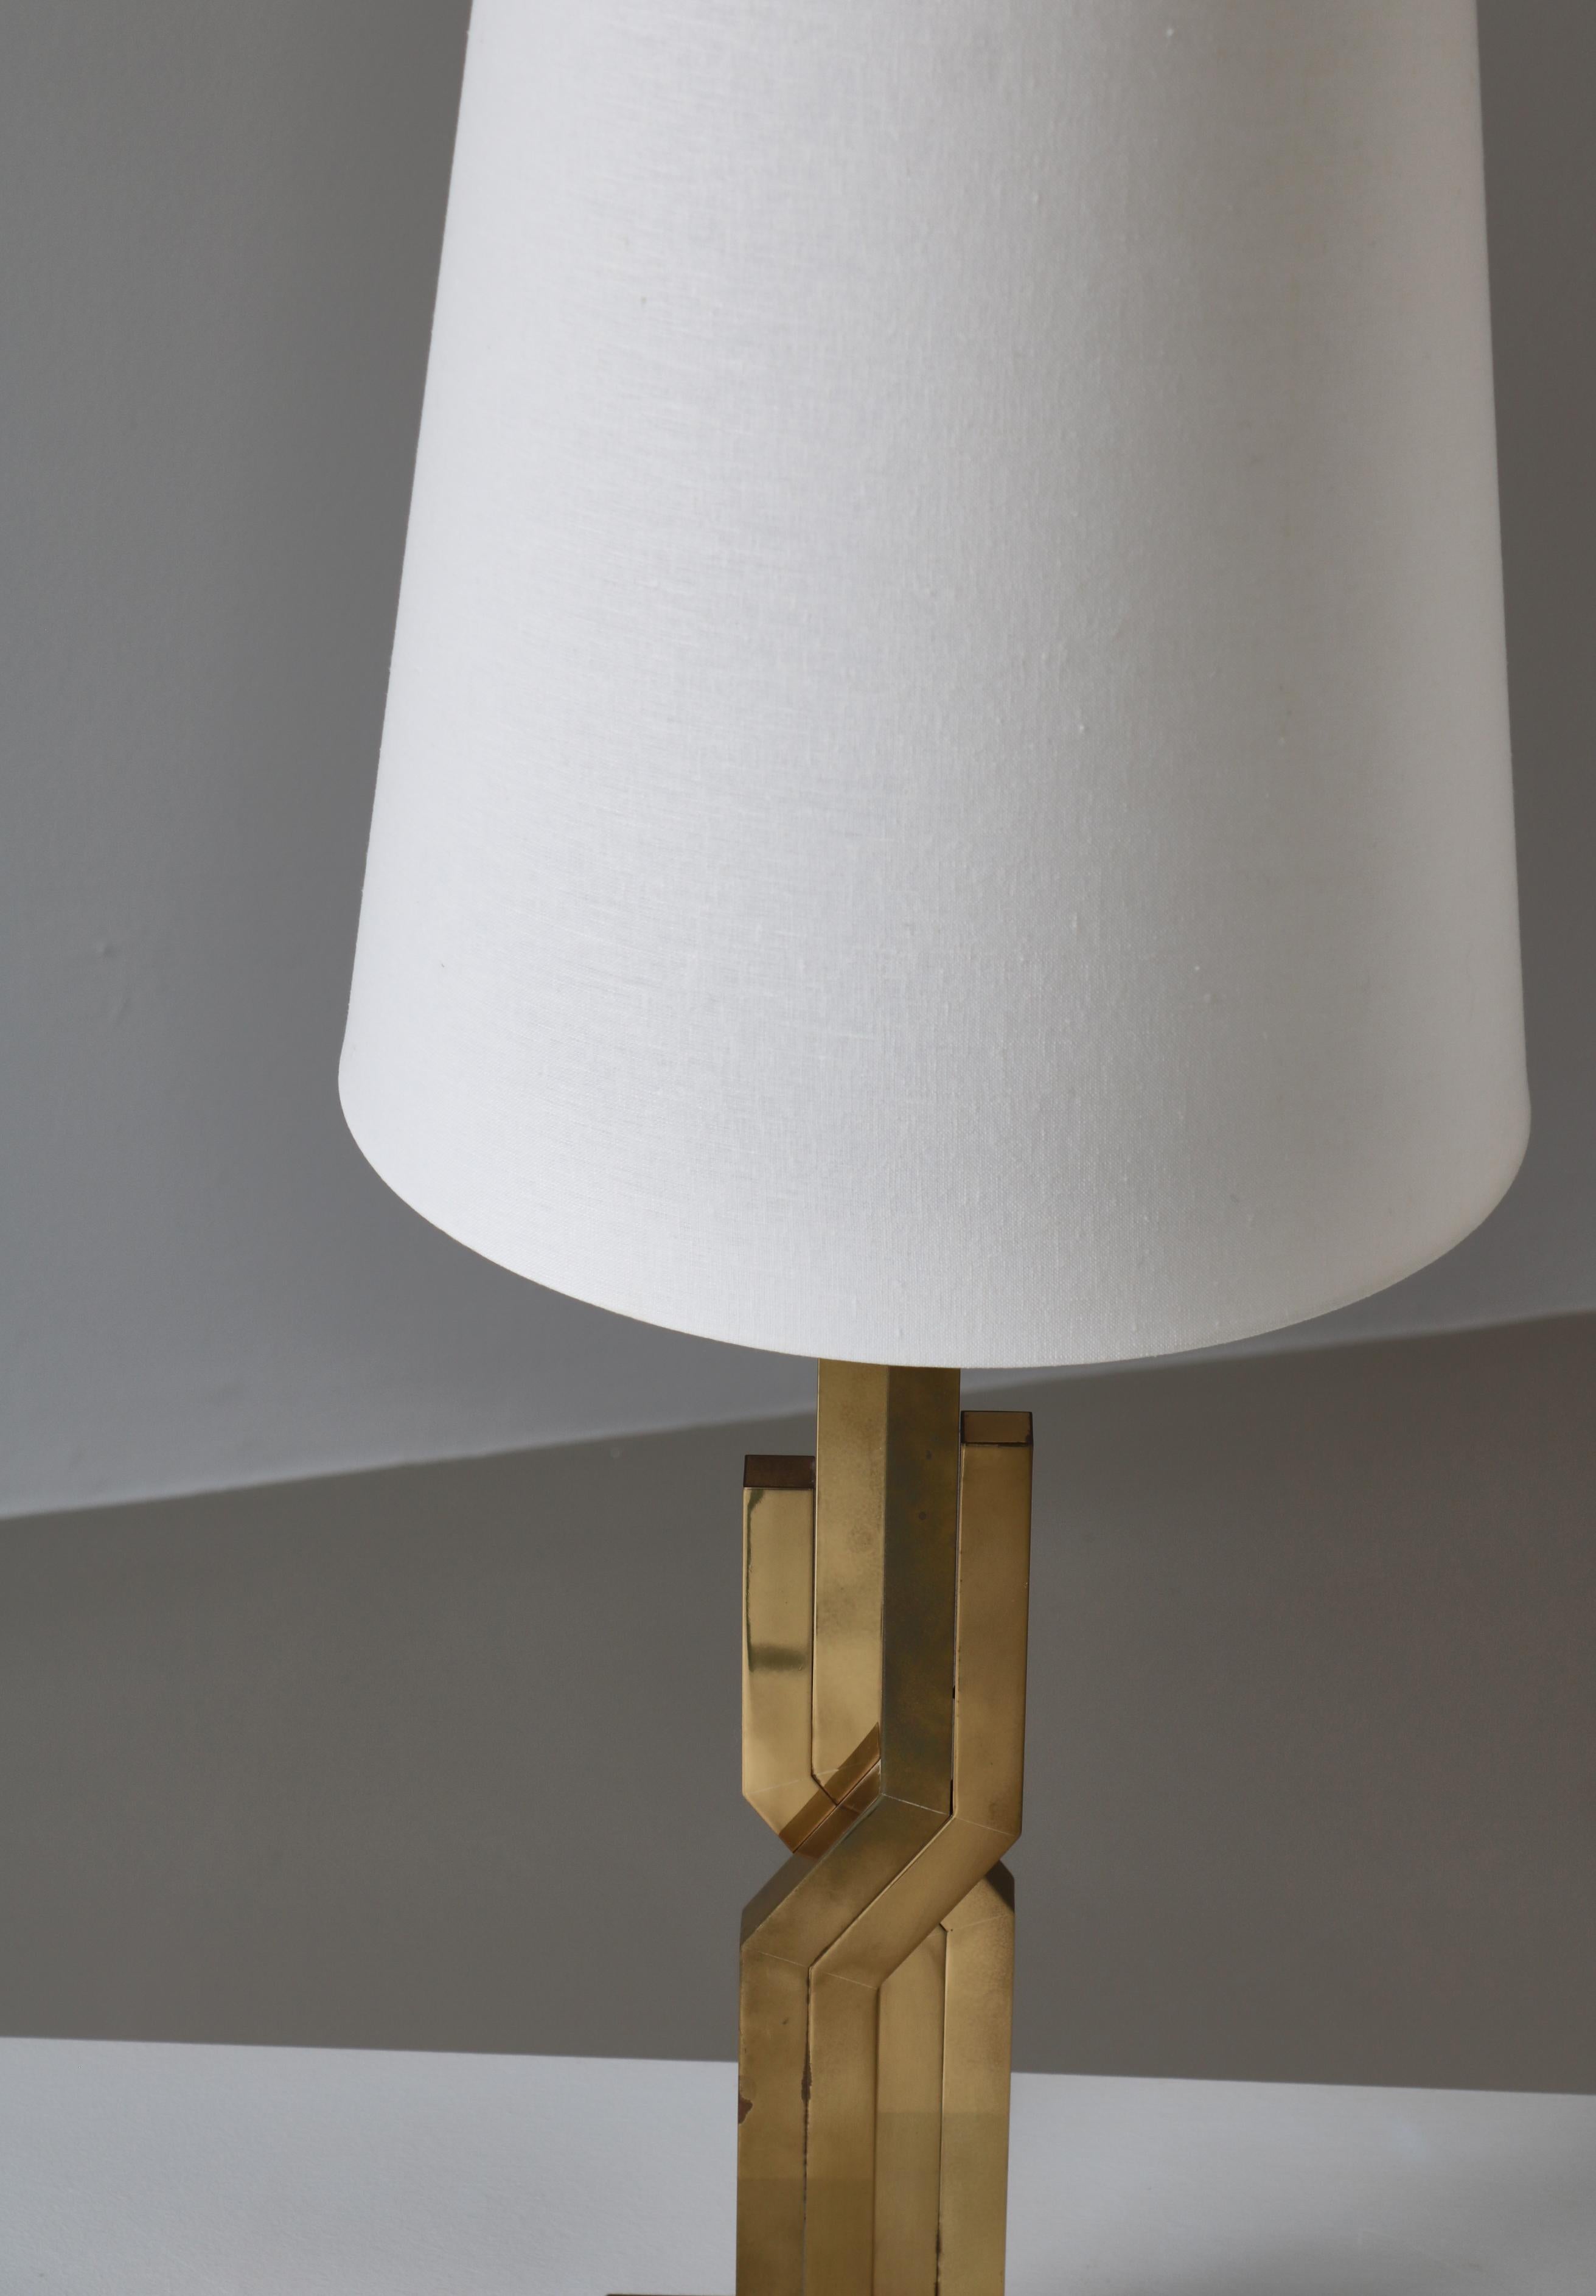 Large Danish Modern Table Lamps in Brass by Svend Aage Holm-Sørensen, 1960s For Sale 7